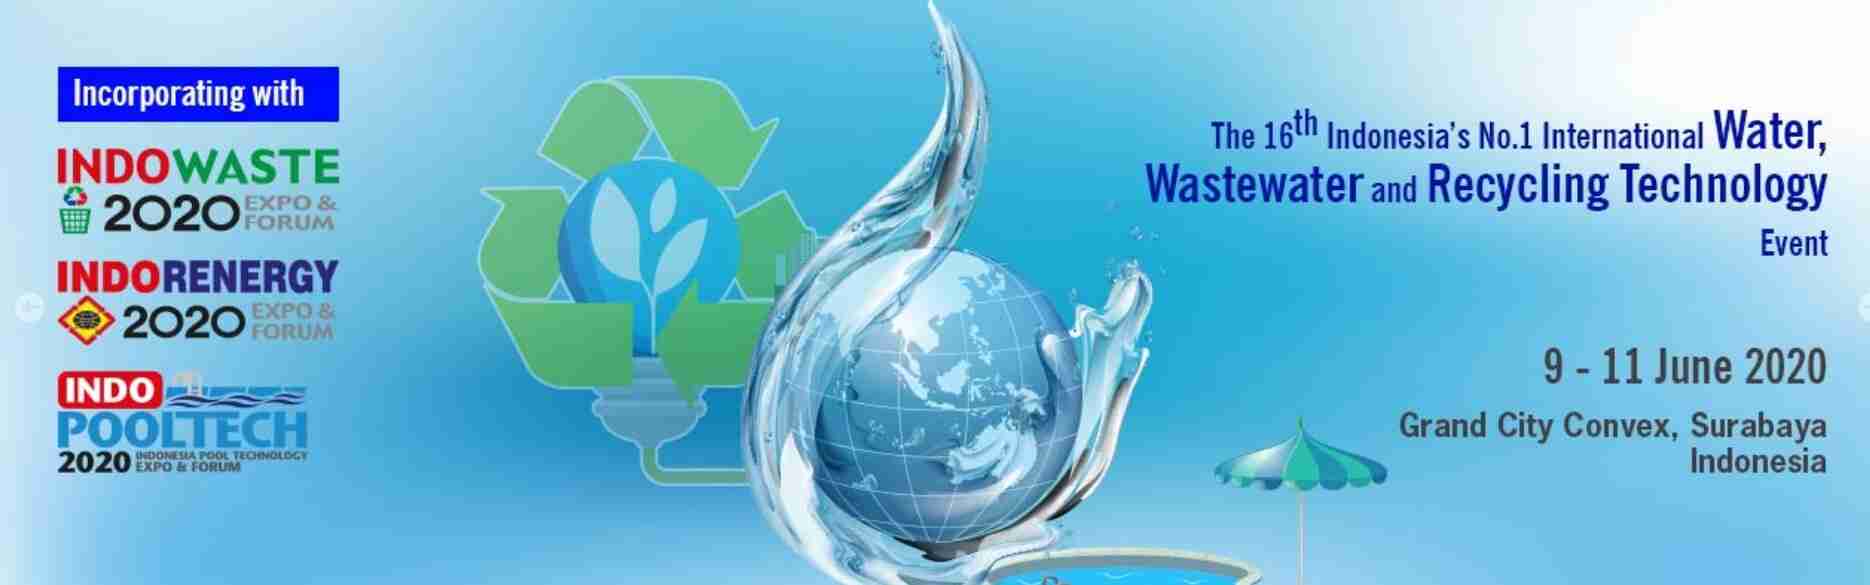 INDO WATER 2020 EXPO & FORUM